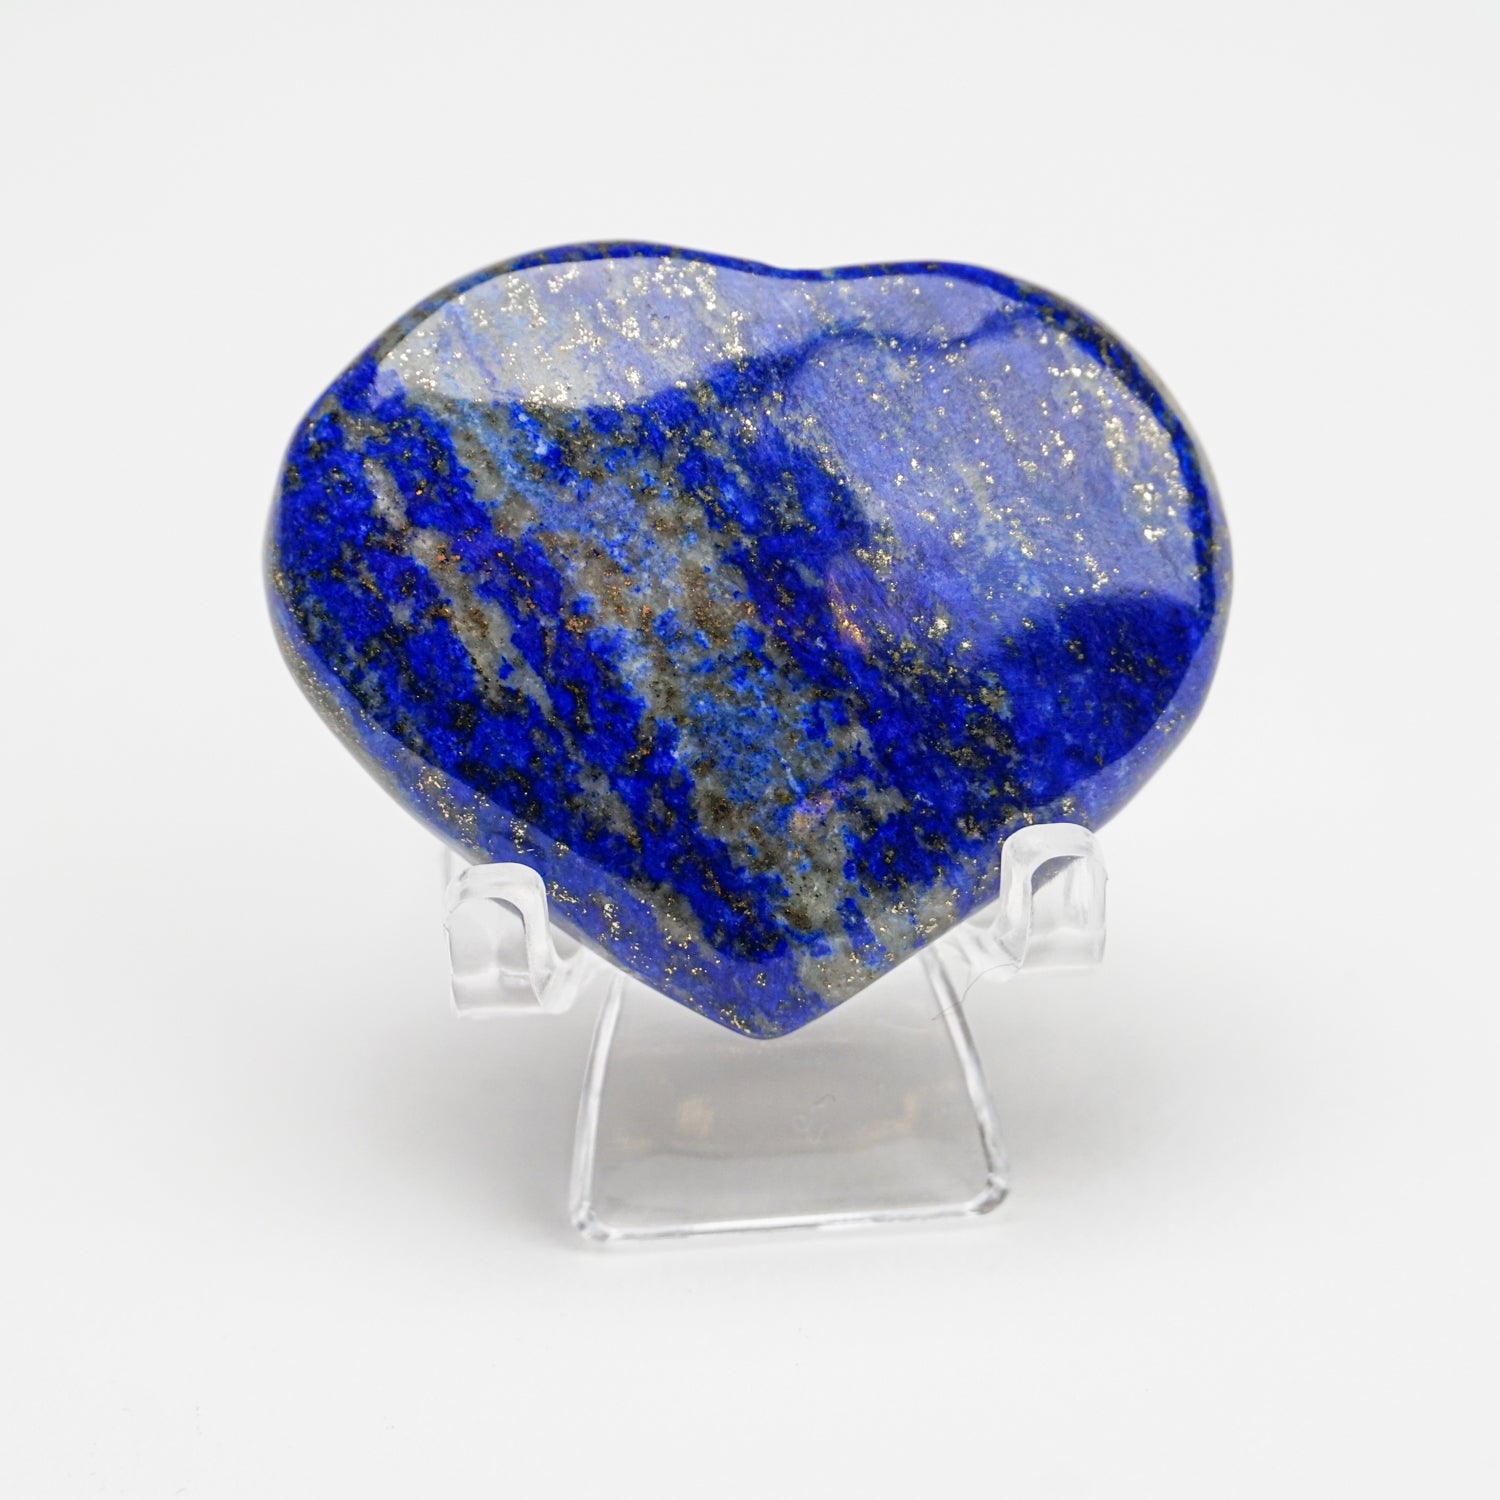 Polished Lapis Lazuli Heart from Afghanistan (34.2 grams)